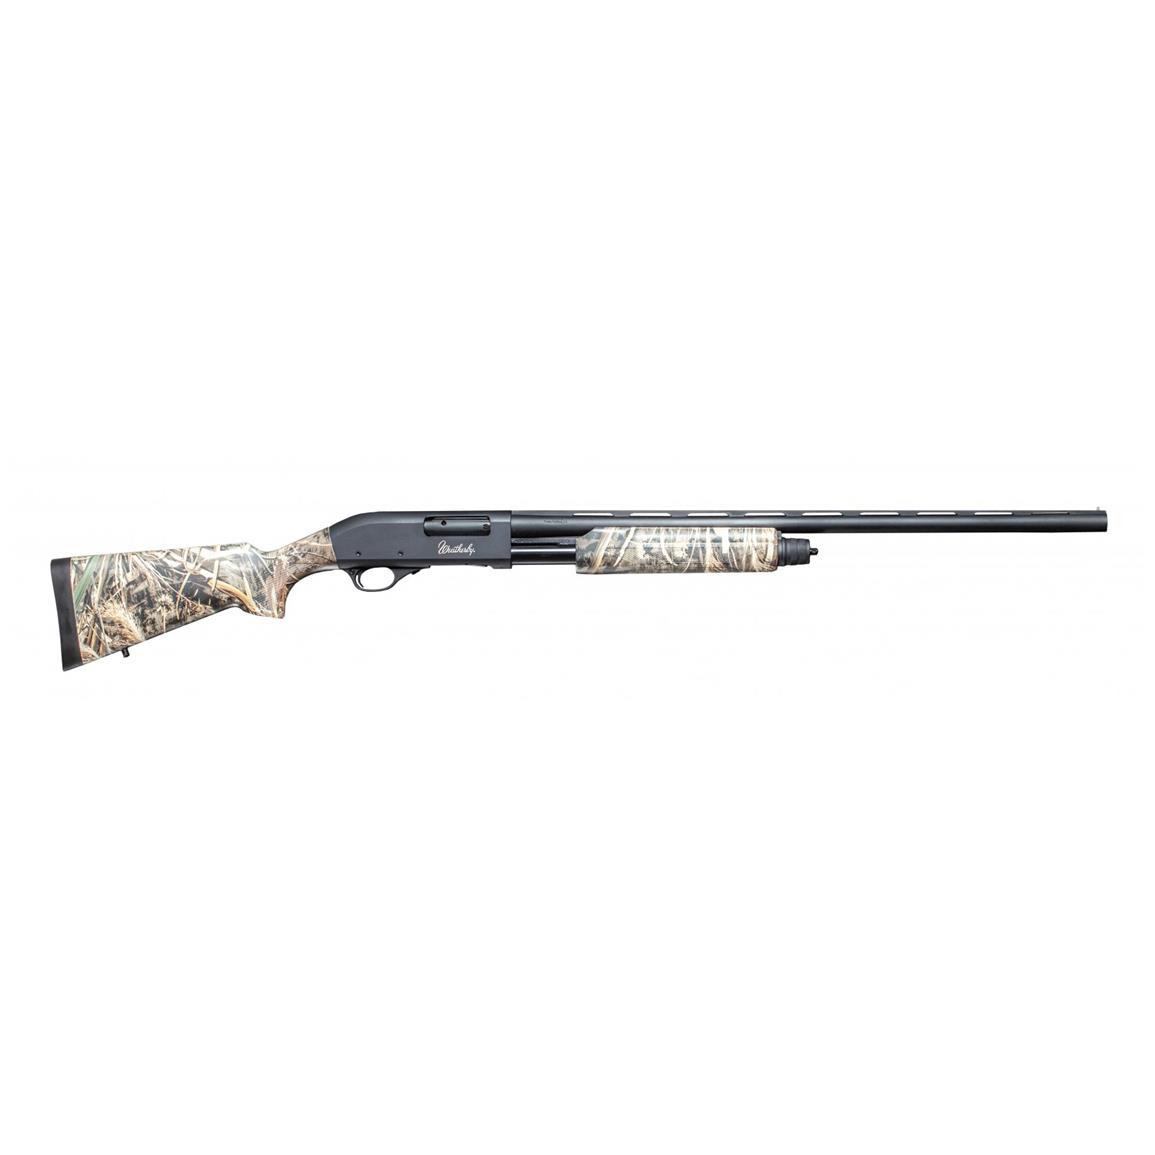 Weatherby PA-08 Waterfowl, Pump Action, 12 Gauge, 28" Barrel, 4+1 Rounds